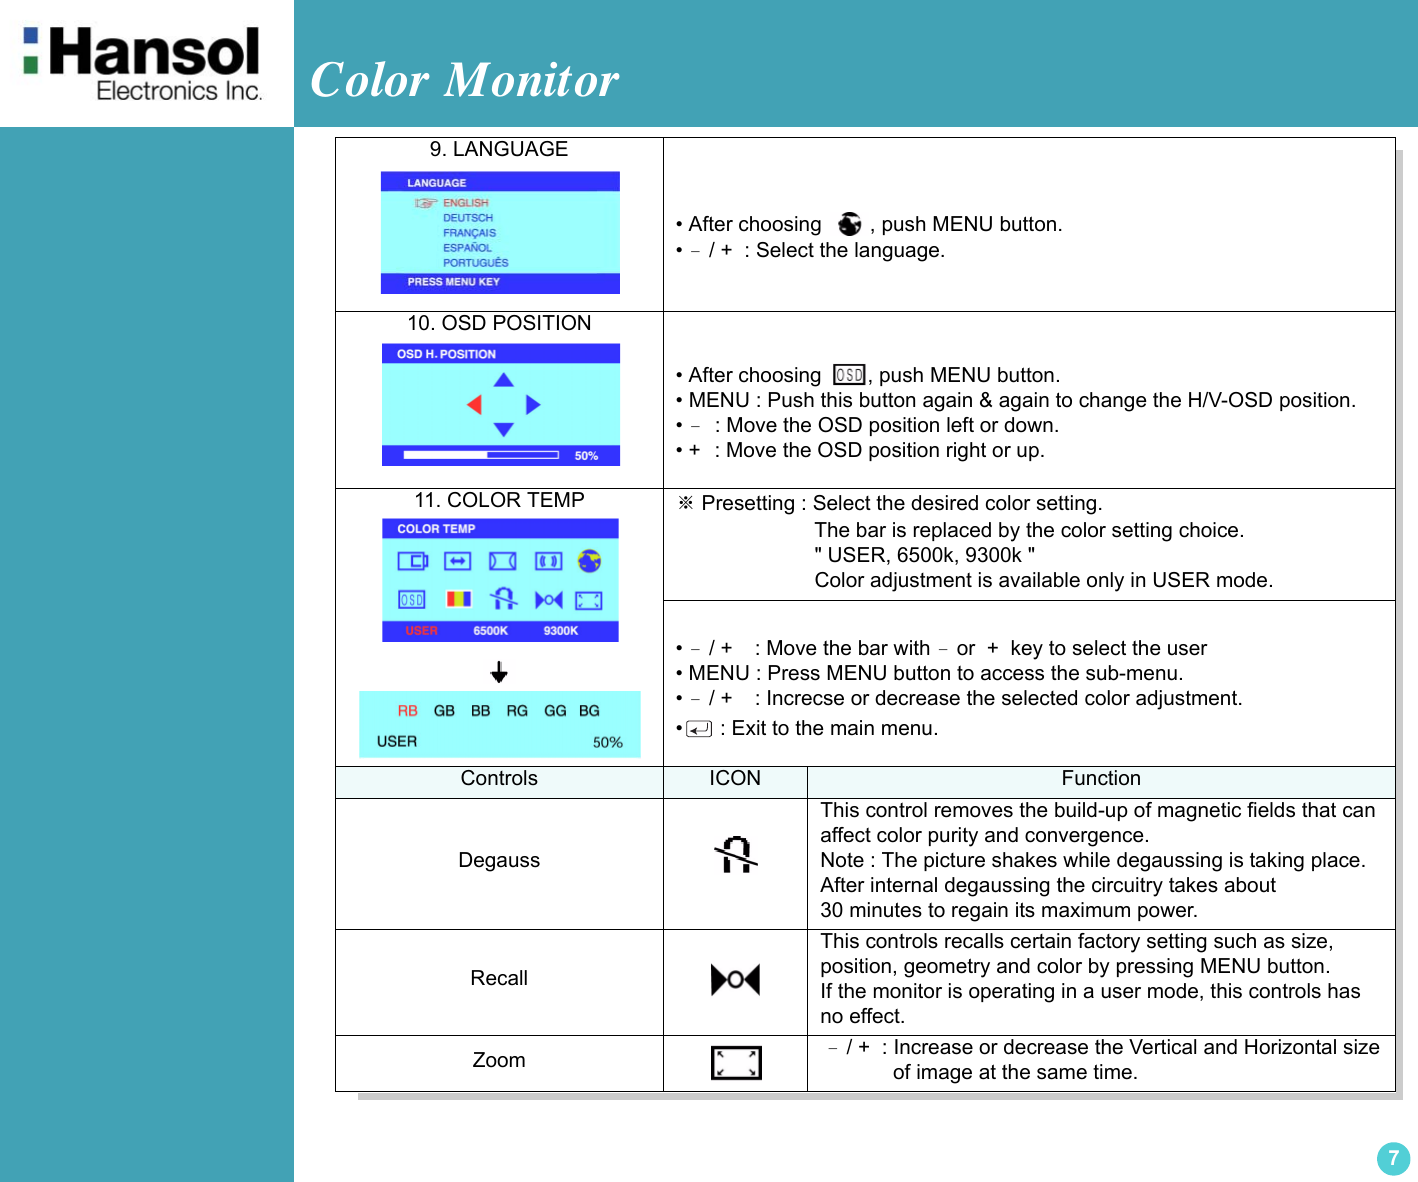 Color Monitor 79. LANGUAGE • After choosing  , push MENU button.• － / +  : Select the language.10. OSD POSITION • After choosing  , push MENU button.• MENU : Push this button again &amp; again to change the H/V-OSD position.• －  : Move the OSD position left or down. • +   : Move the OSD position right or up.11. COLOR TEMP ※Presetting : Select the desired color setting.                      The bar is replaced by the color setting choice.                        &quot; USER, 6500k, 9300k &quot;                        Color adjustment is available only in USER mode.• － / +    : Move the bar with － or  +  key to select the user• MENU : Press MENU button to access the sub-menu.• － / +    : Increcse or decrease the selected color adjustment.•  : Exit to the main menu.Controls ICON FunctionDegaussThis control removes the build-up of magnetic fields that canaffect color purity and convergence.Note : The picture shakes while degaussing is taking place. After internal degaussing the circuitry takes about30 minutes to regain its maximum power.RecallThis controls recalls certain factory setting such as size,position, geometry and color by pressing MENU button.If the monitor is operating in a user mode, this controls hasno effect.Zoom  － / +  : Increase or decrease the Vertical and Horizontal size              of image at the same time.